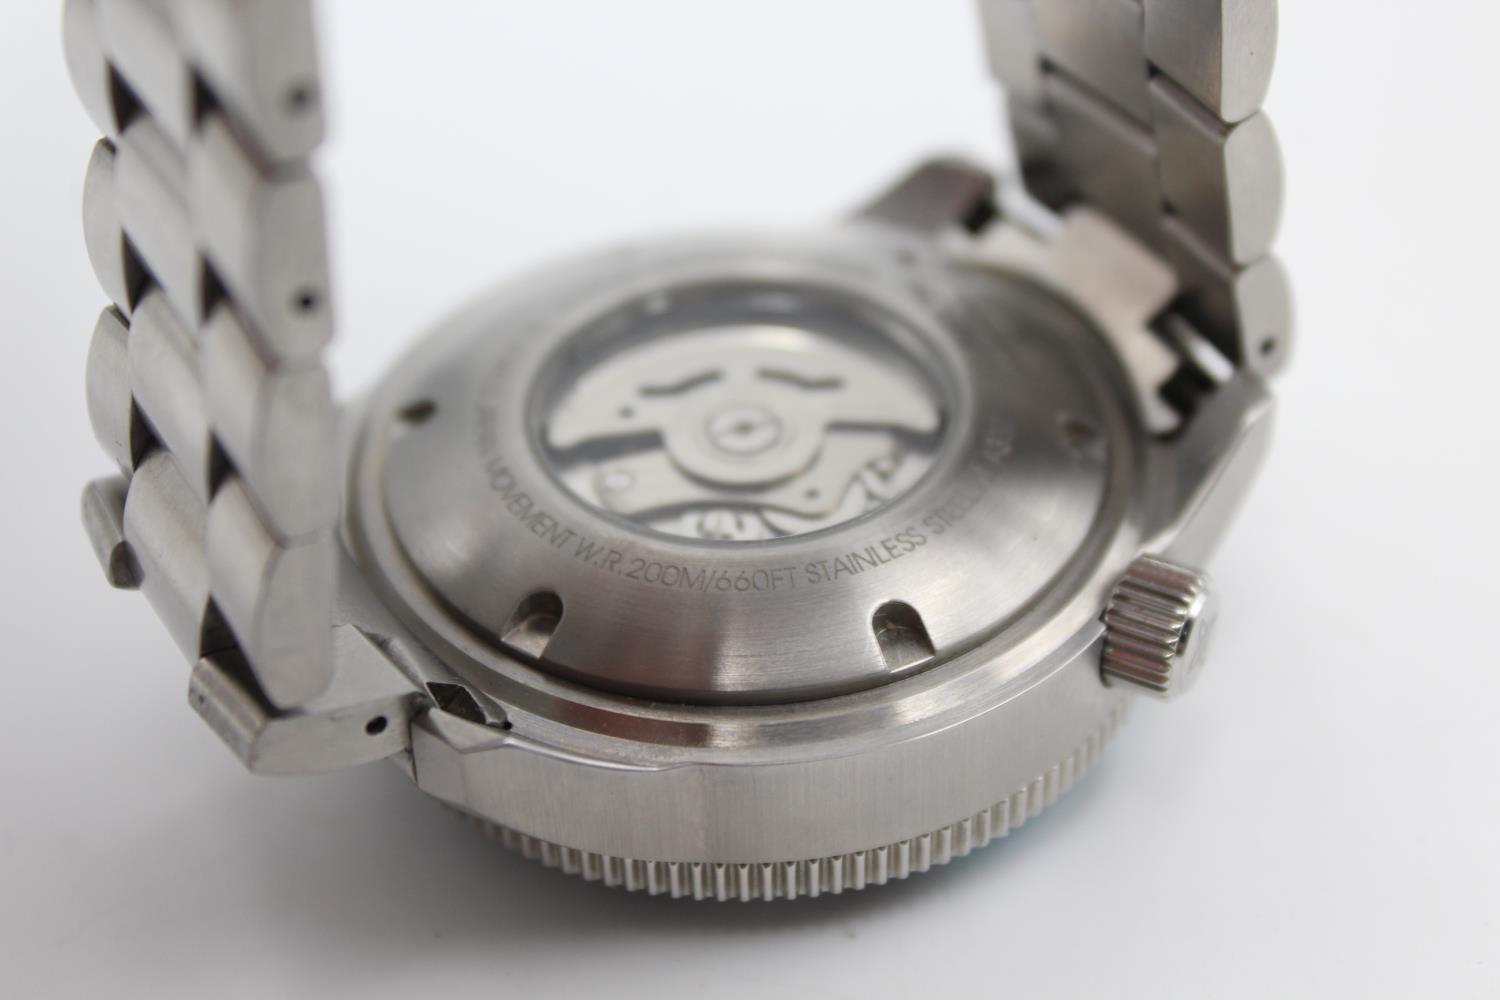 Gents ARAGON Divemaster Mechanical Divers WRISTWATCH Automatic WORKING - Image 3 of 4